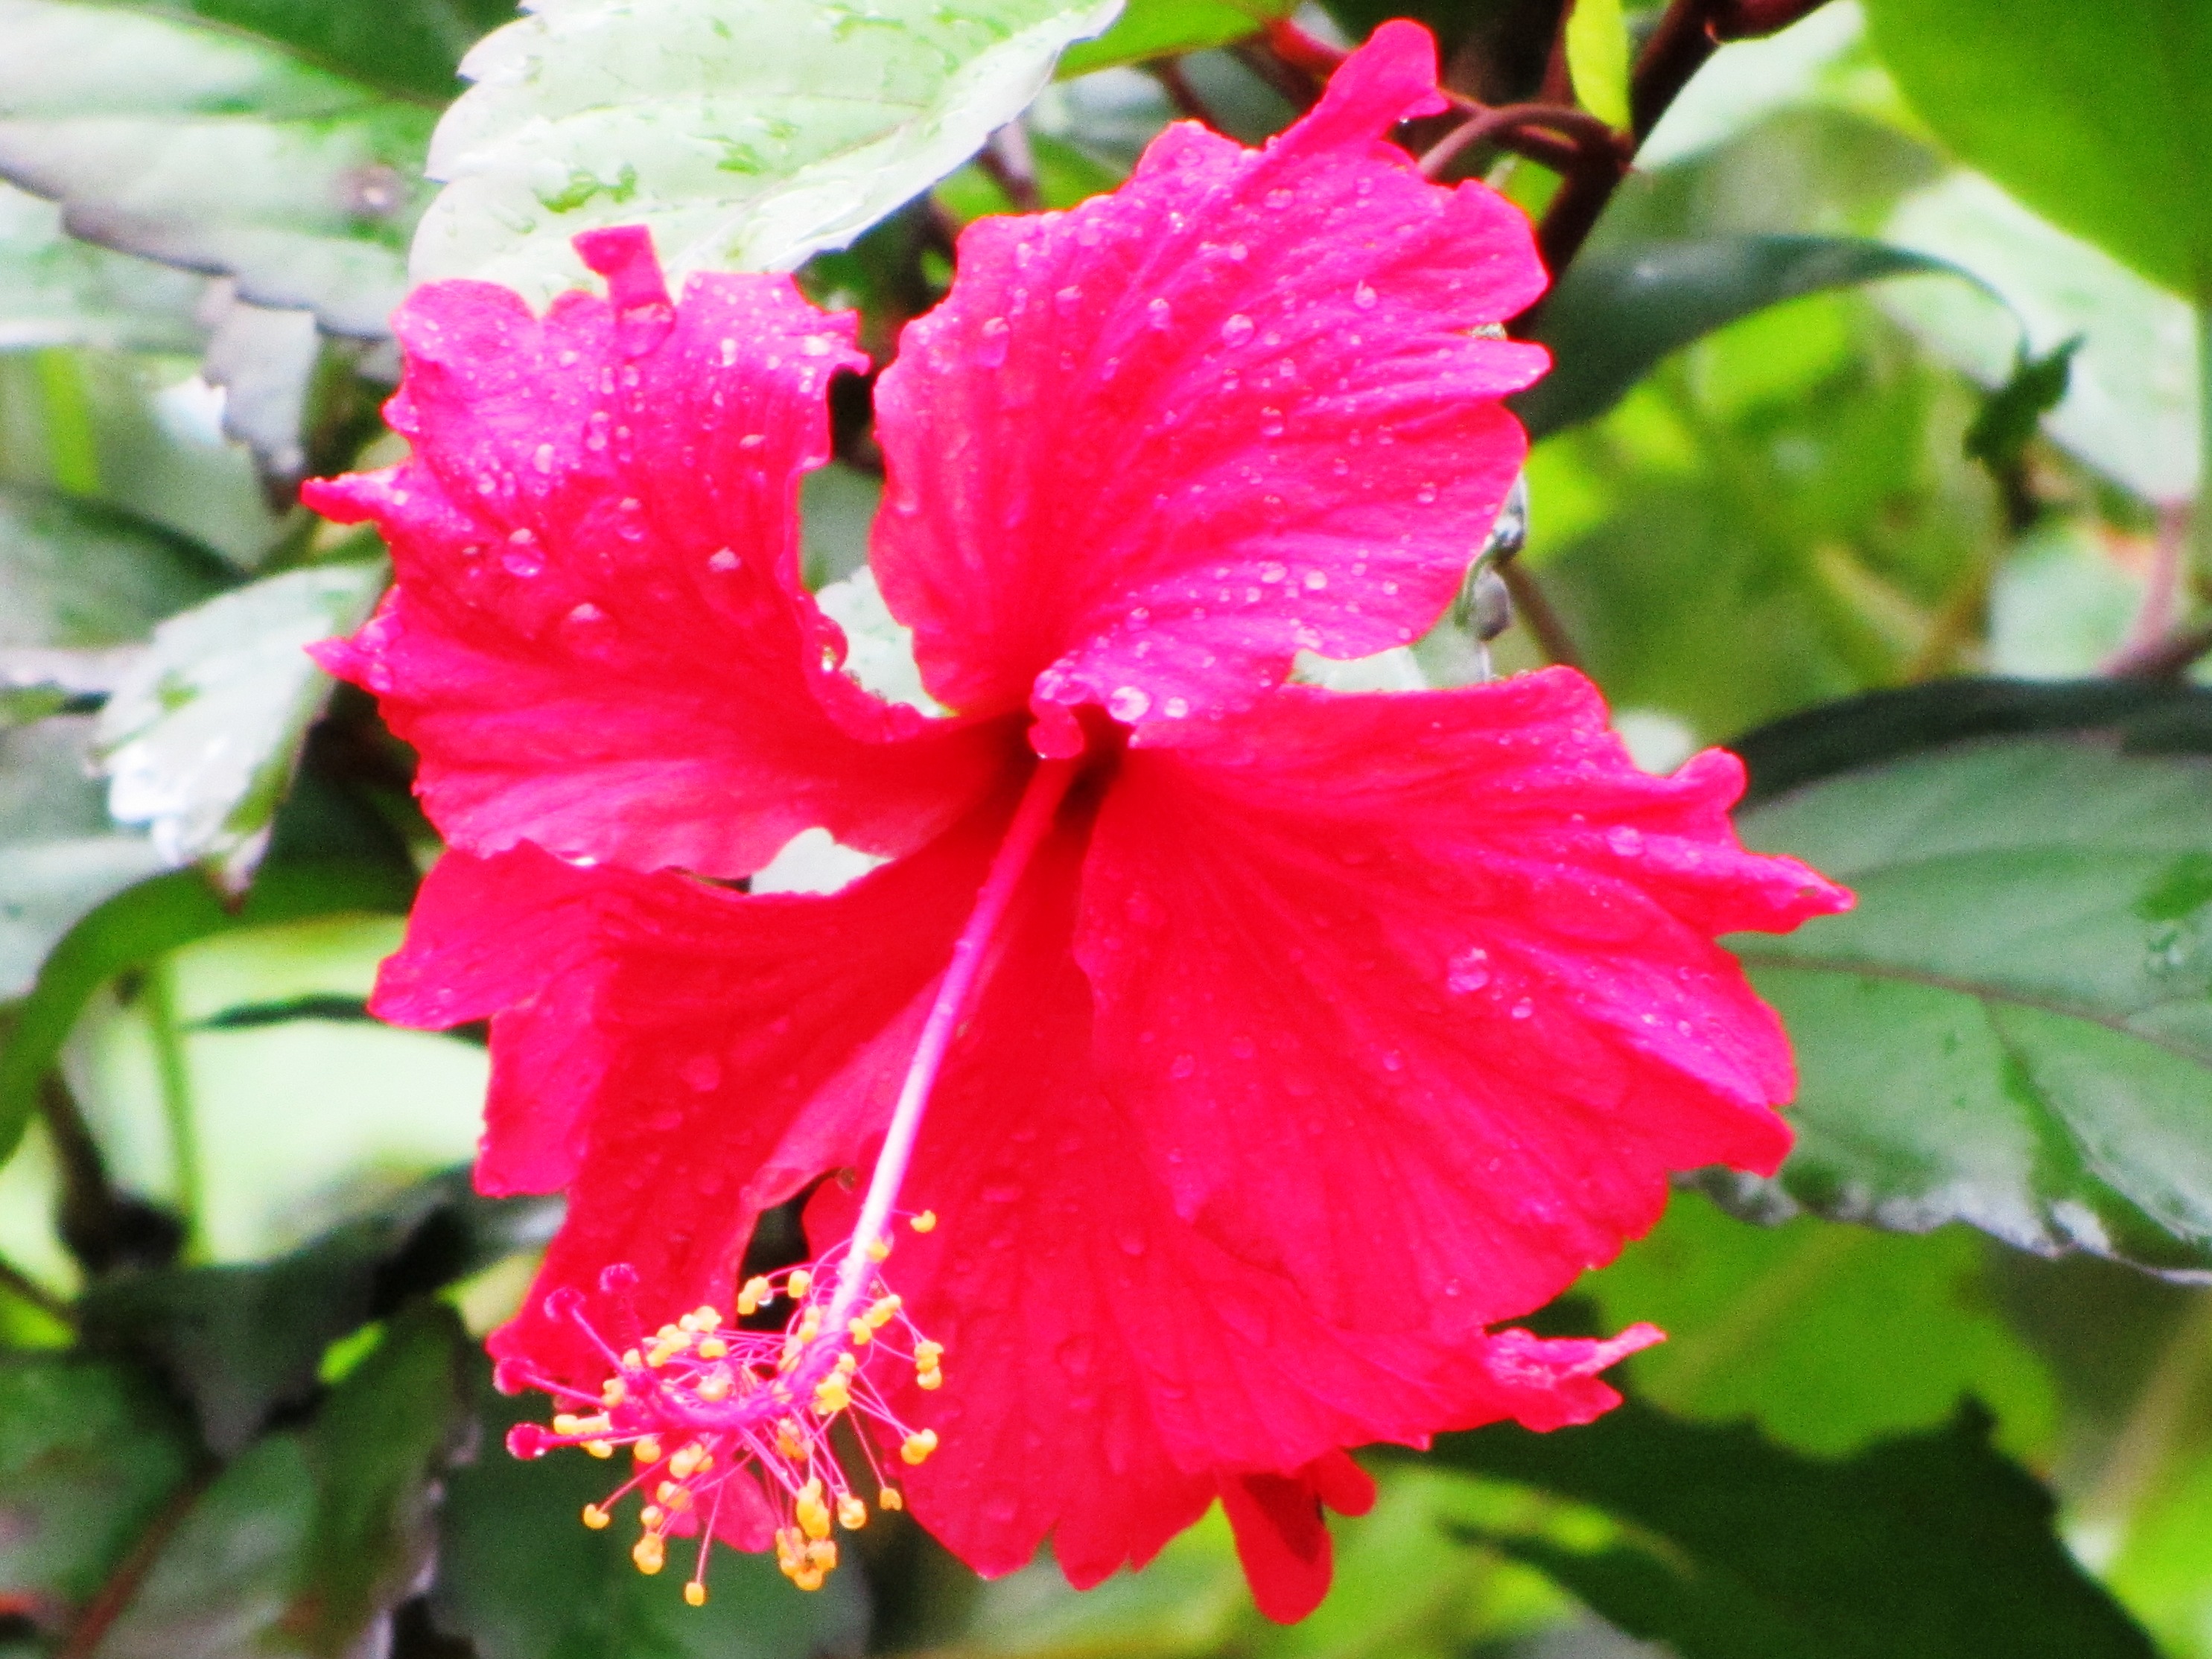 Photo of a flower in the rain forest